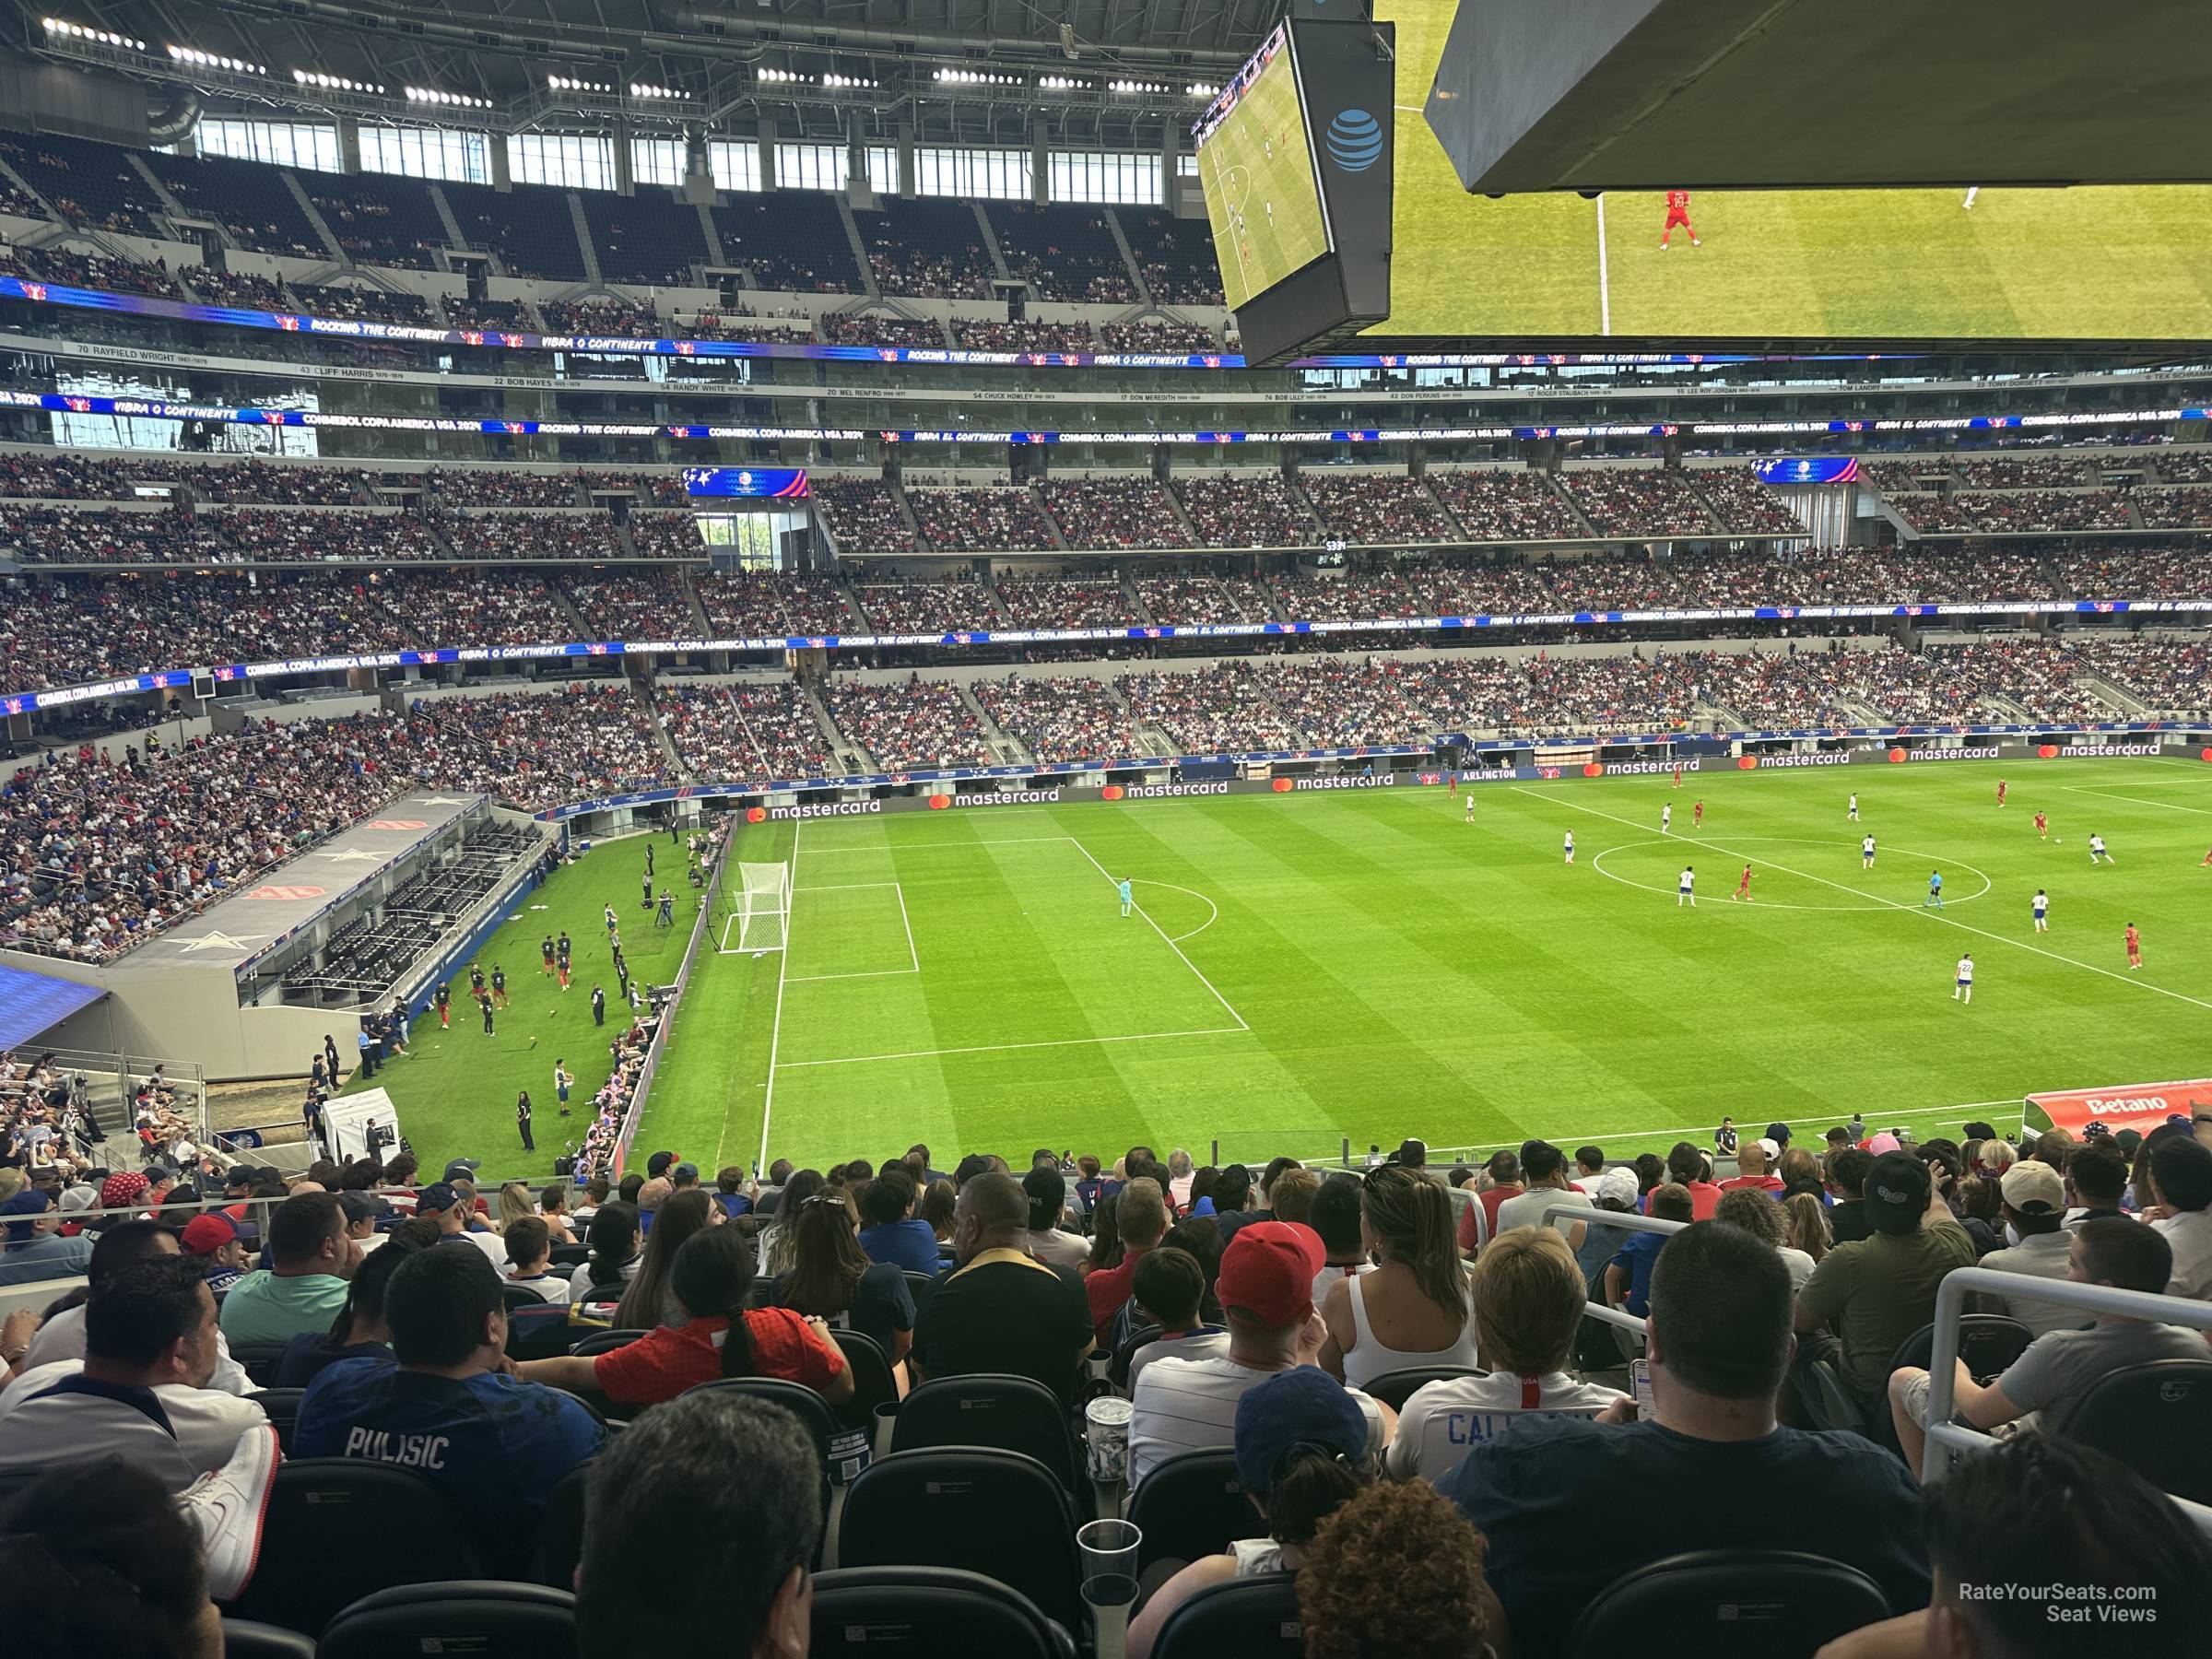 section c239, row 14 seat view  for soccer - at&t stadium (cowboys stadium)